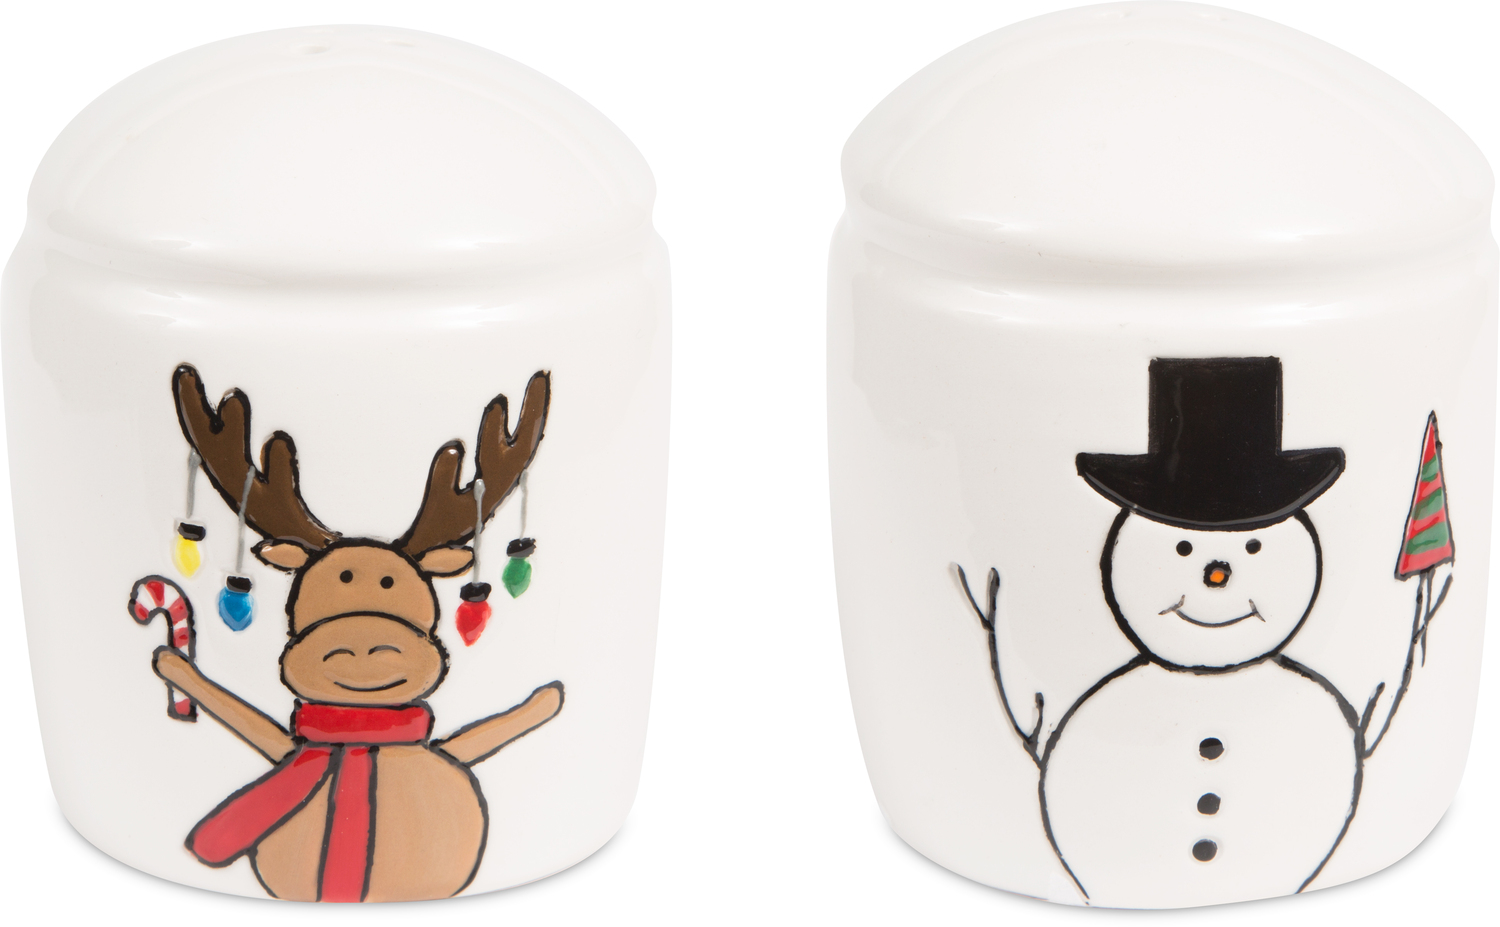 Snowman with Moose by Holiday Hoopla - Snowman with Moose - 3" Salt & Pepper Shakers